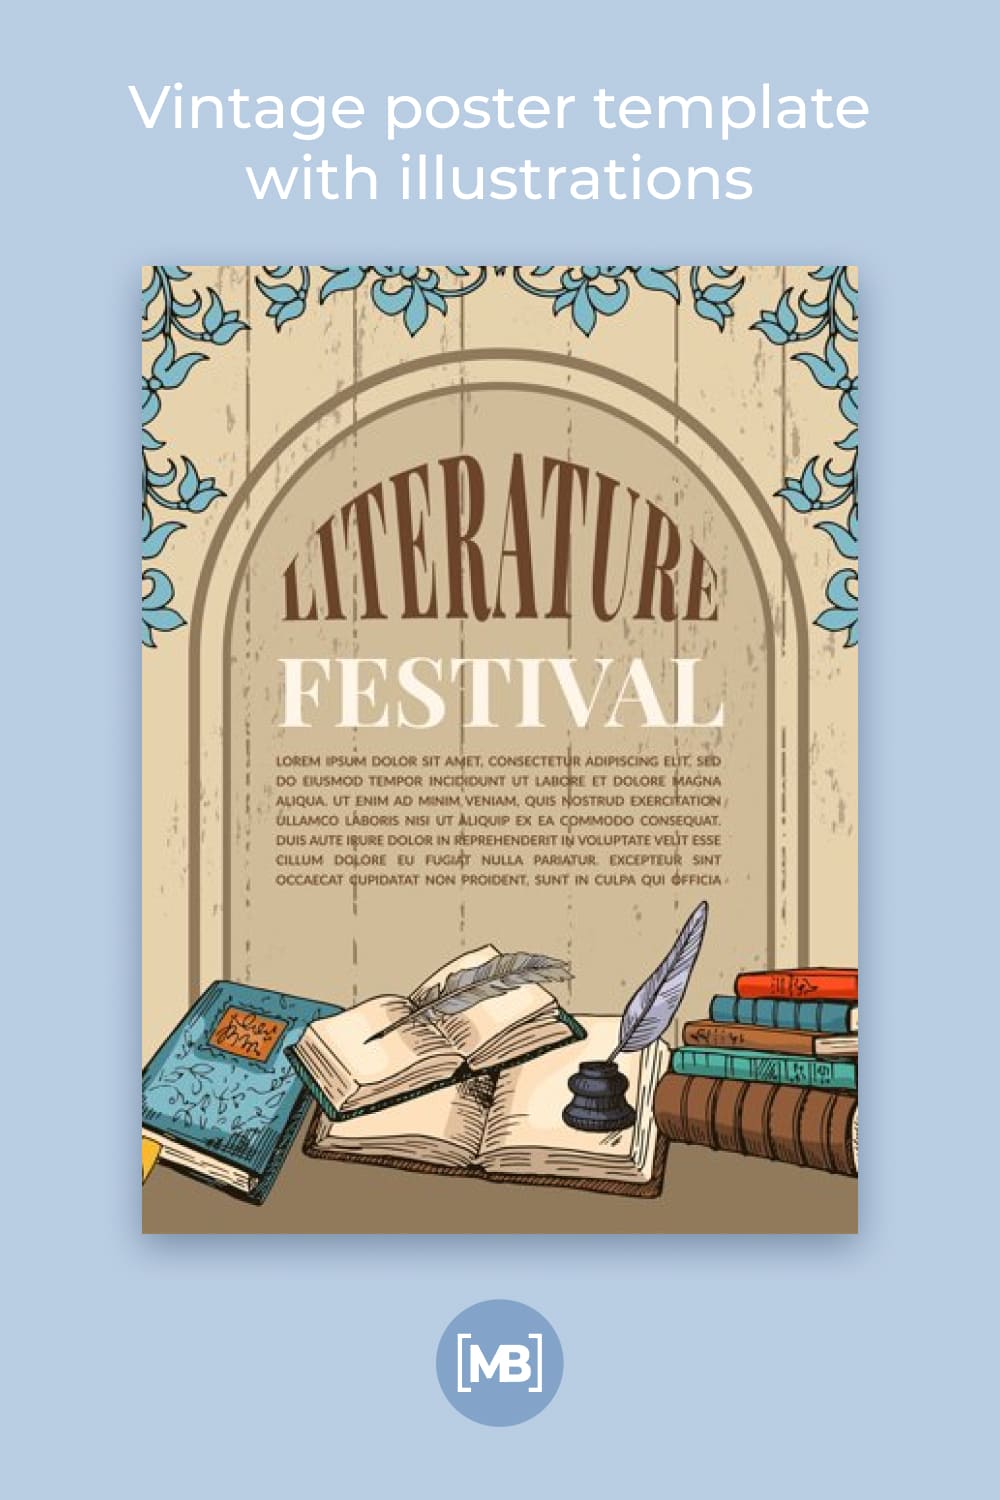 Poster in vintage style with books and ornaments.